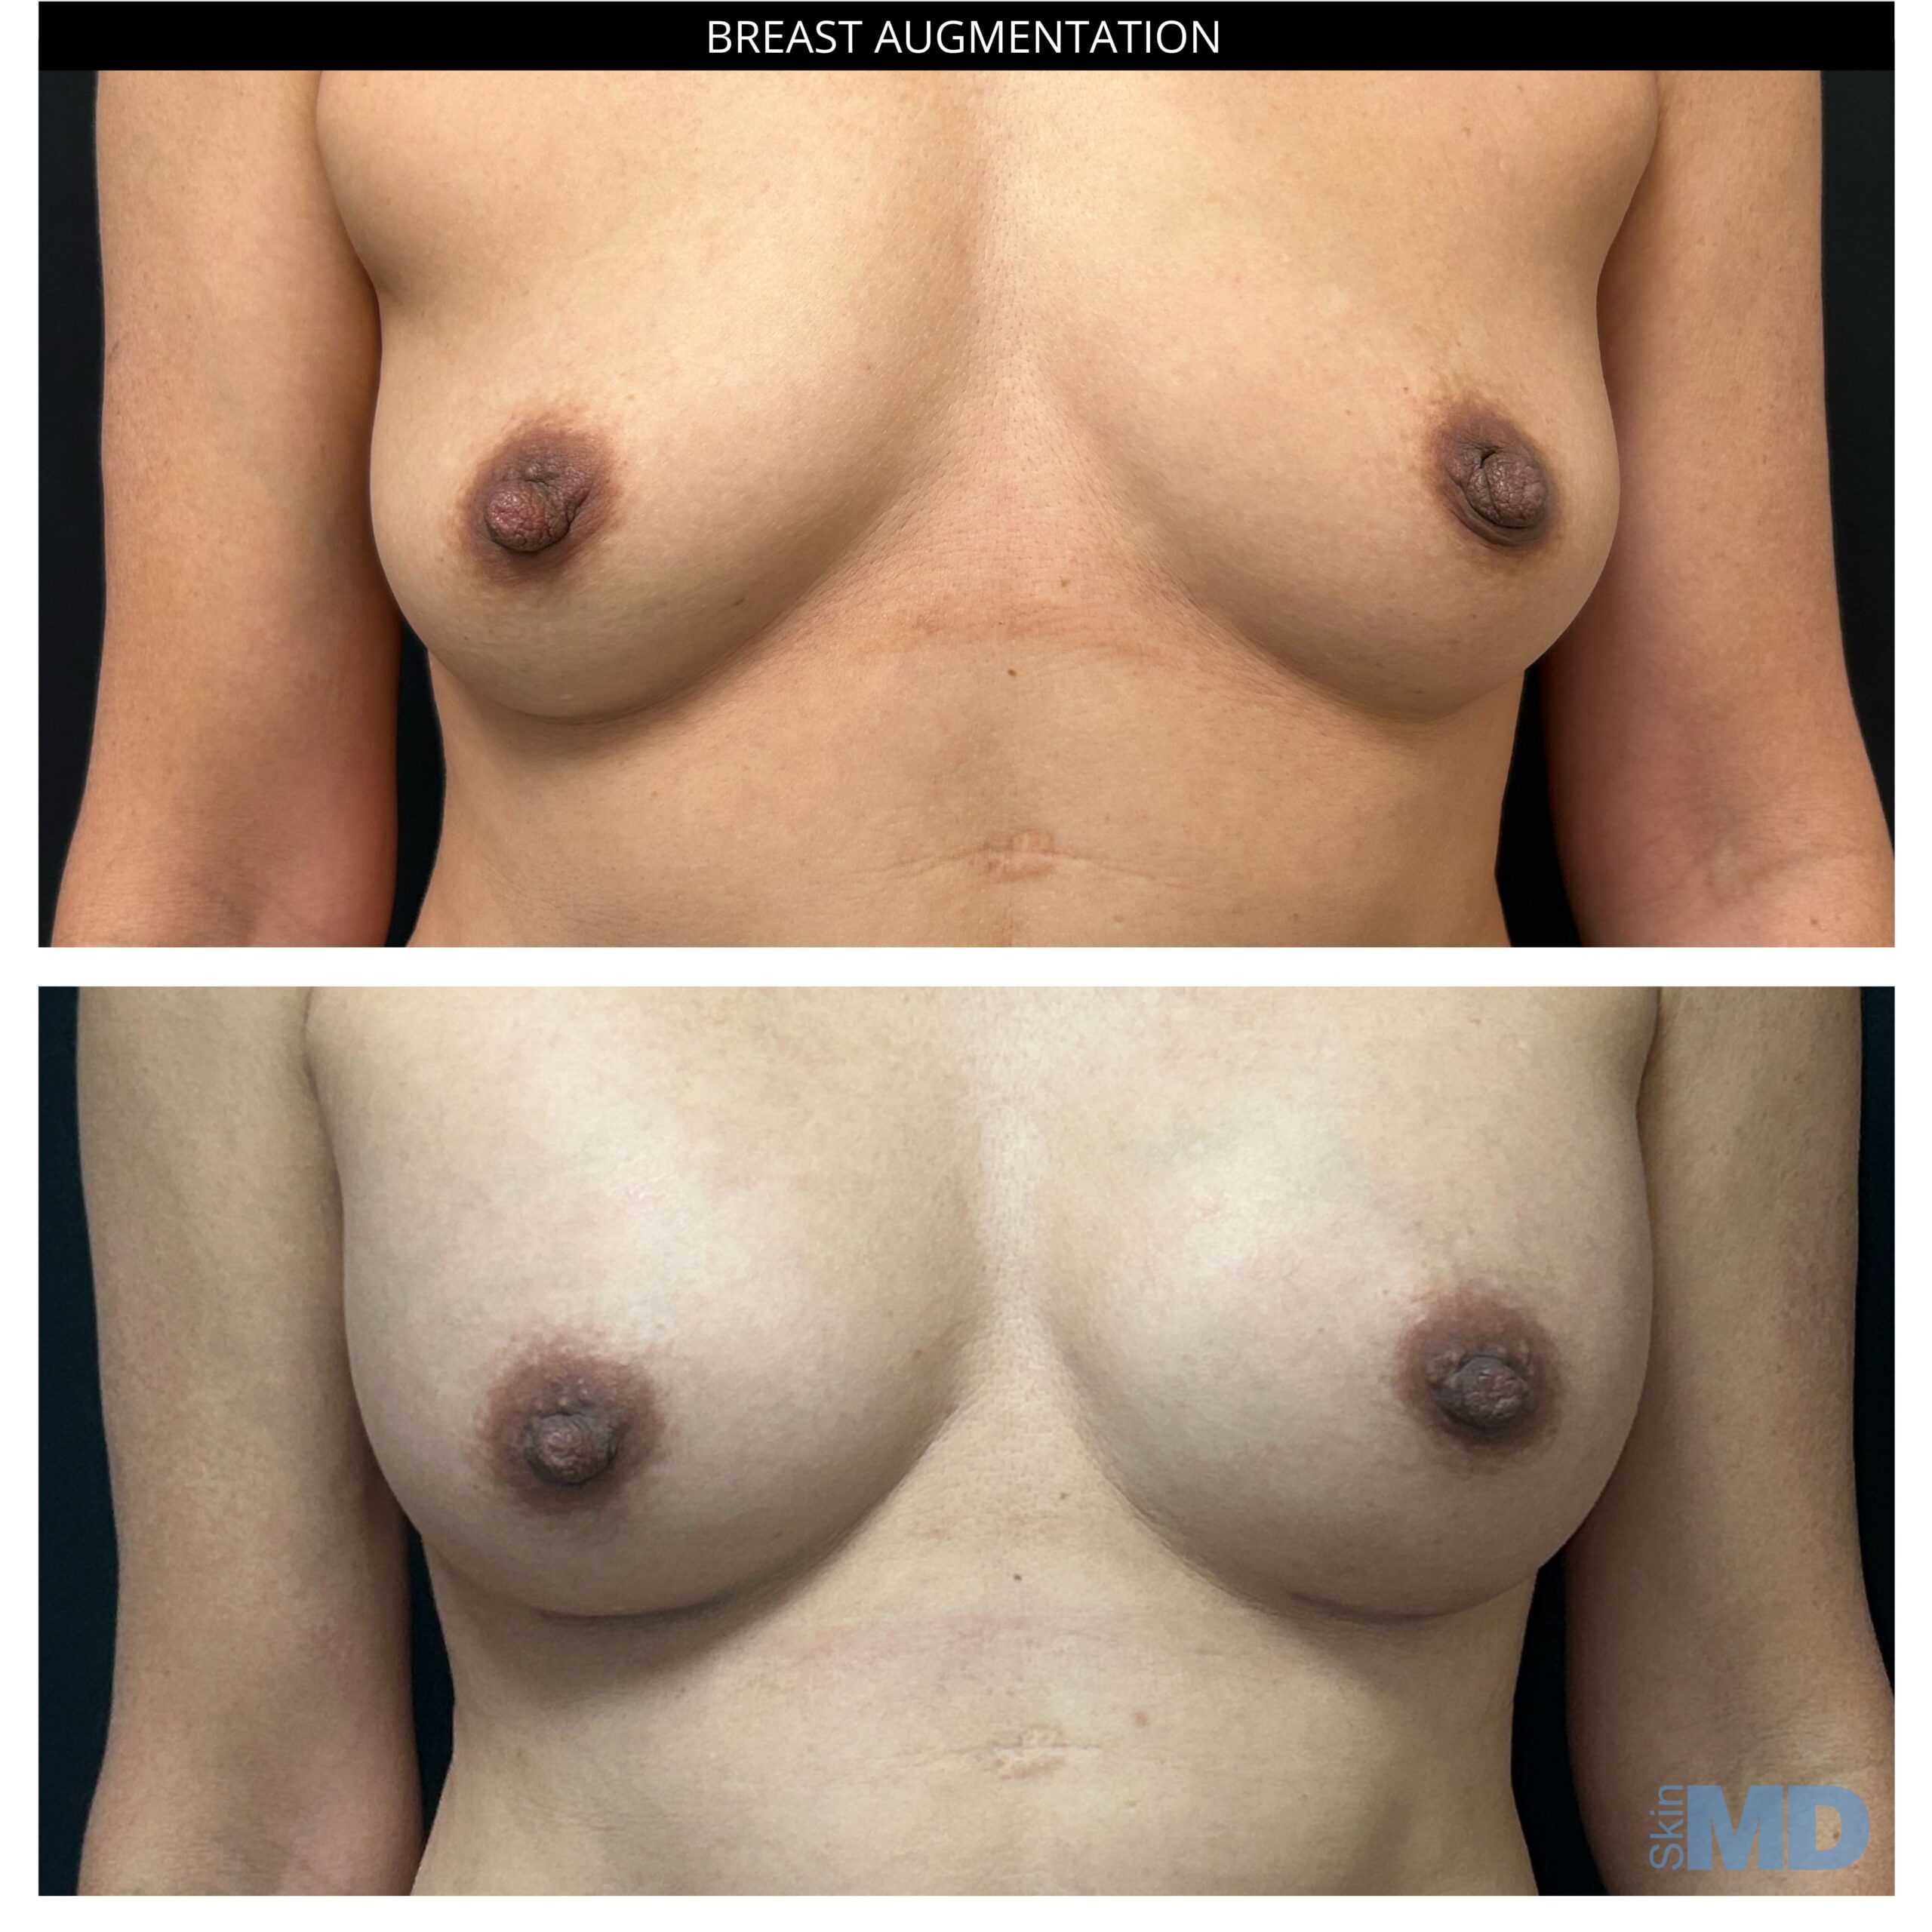 Before and after breast augmentation results